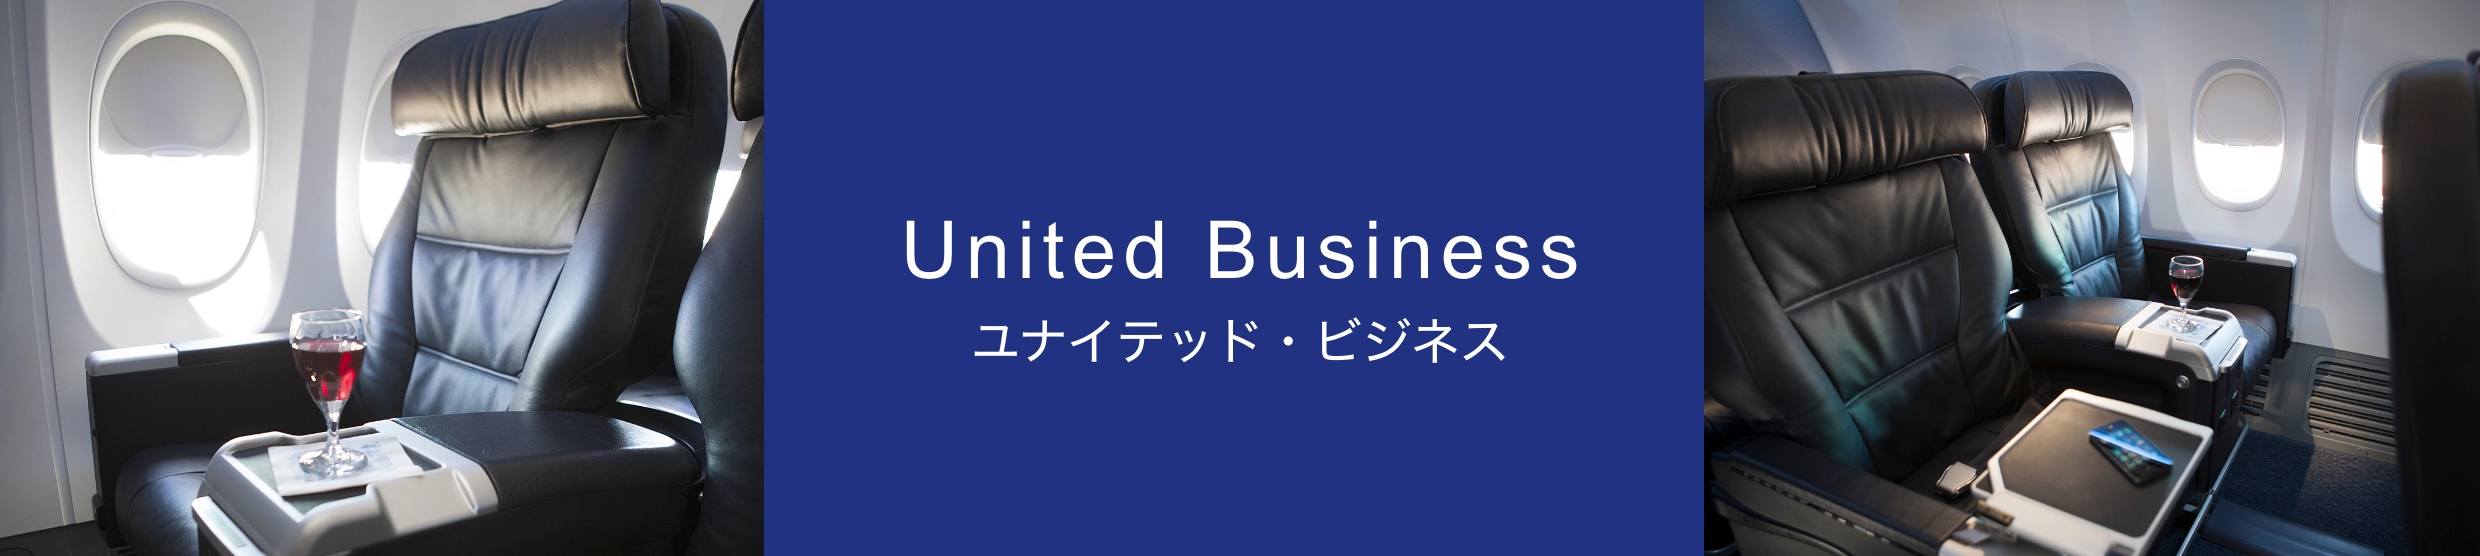 United Business